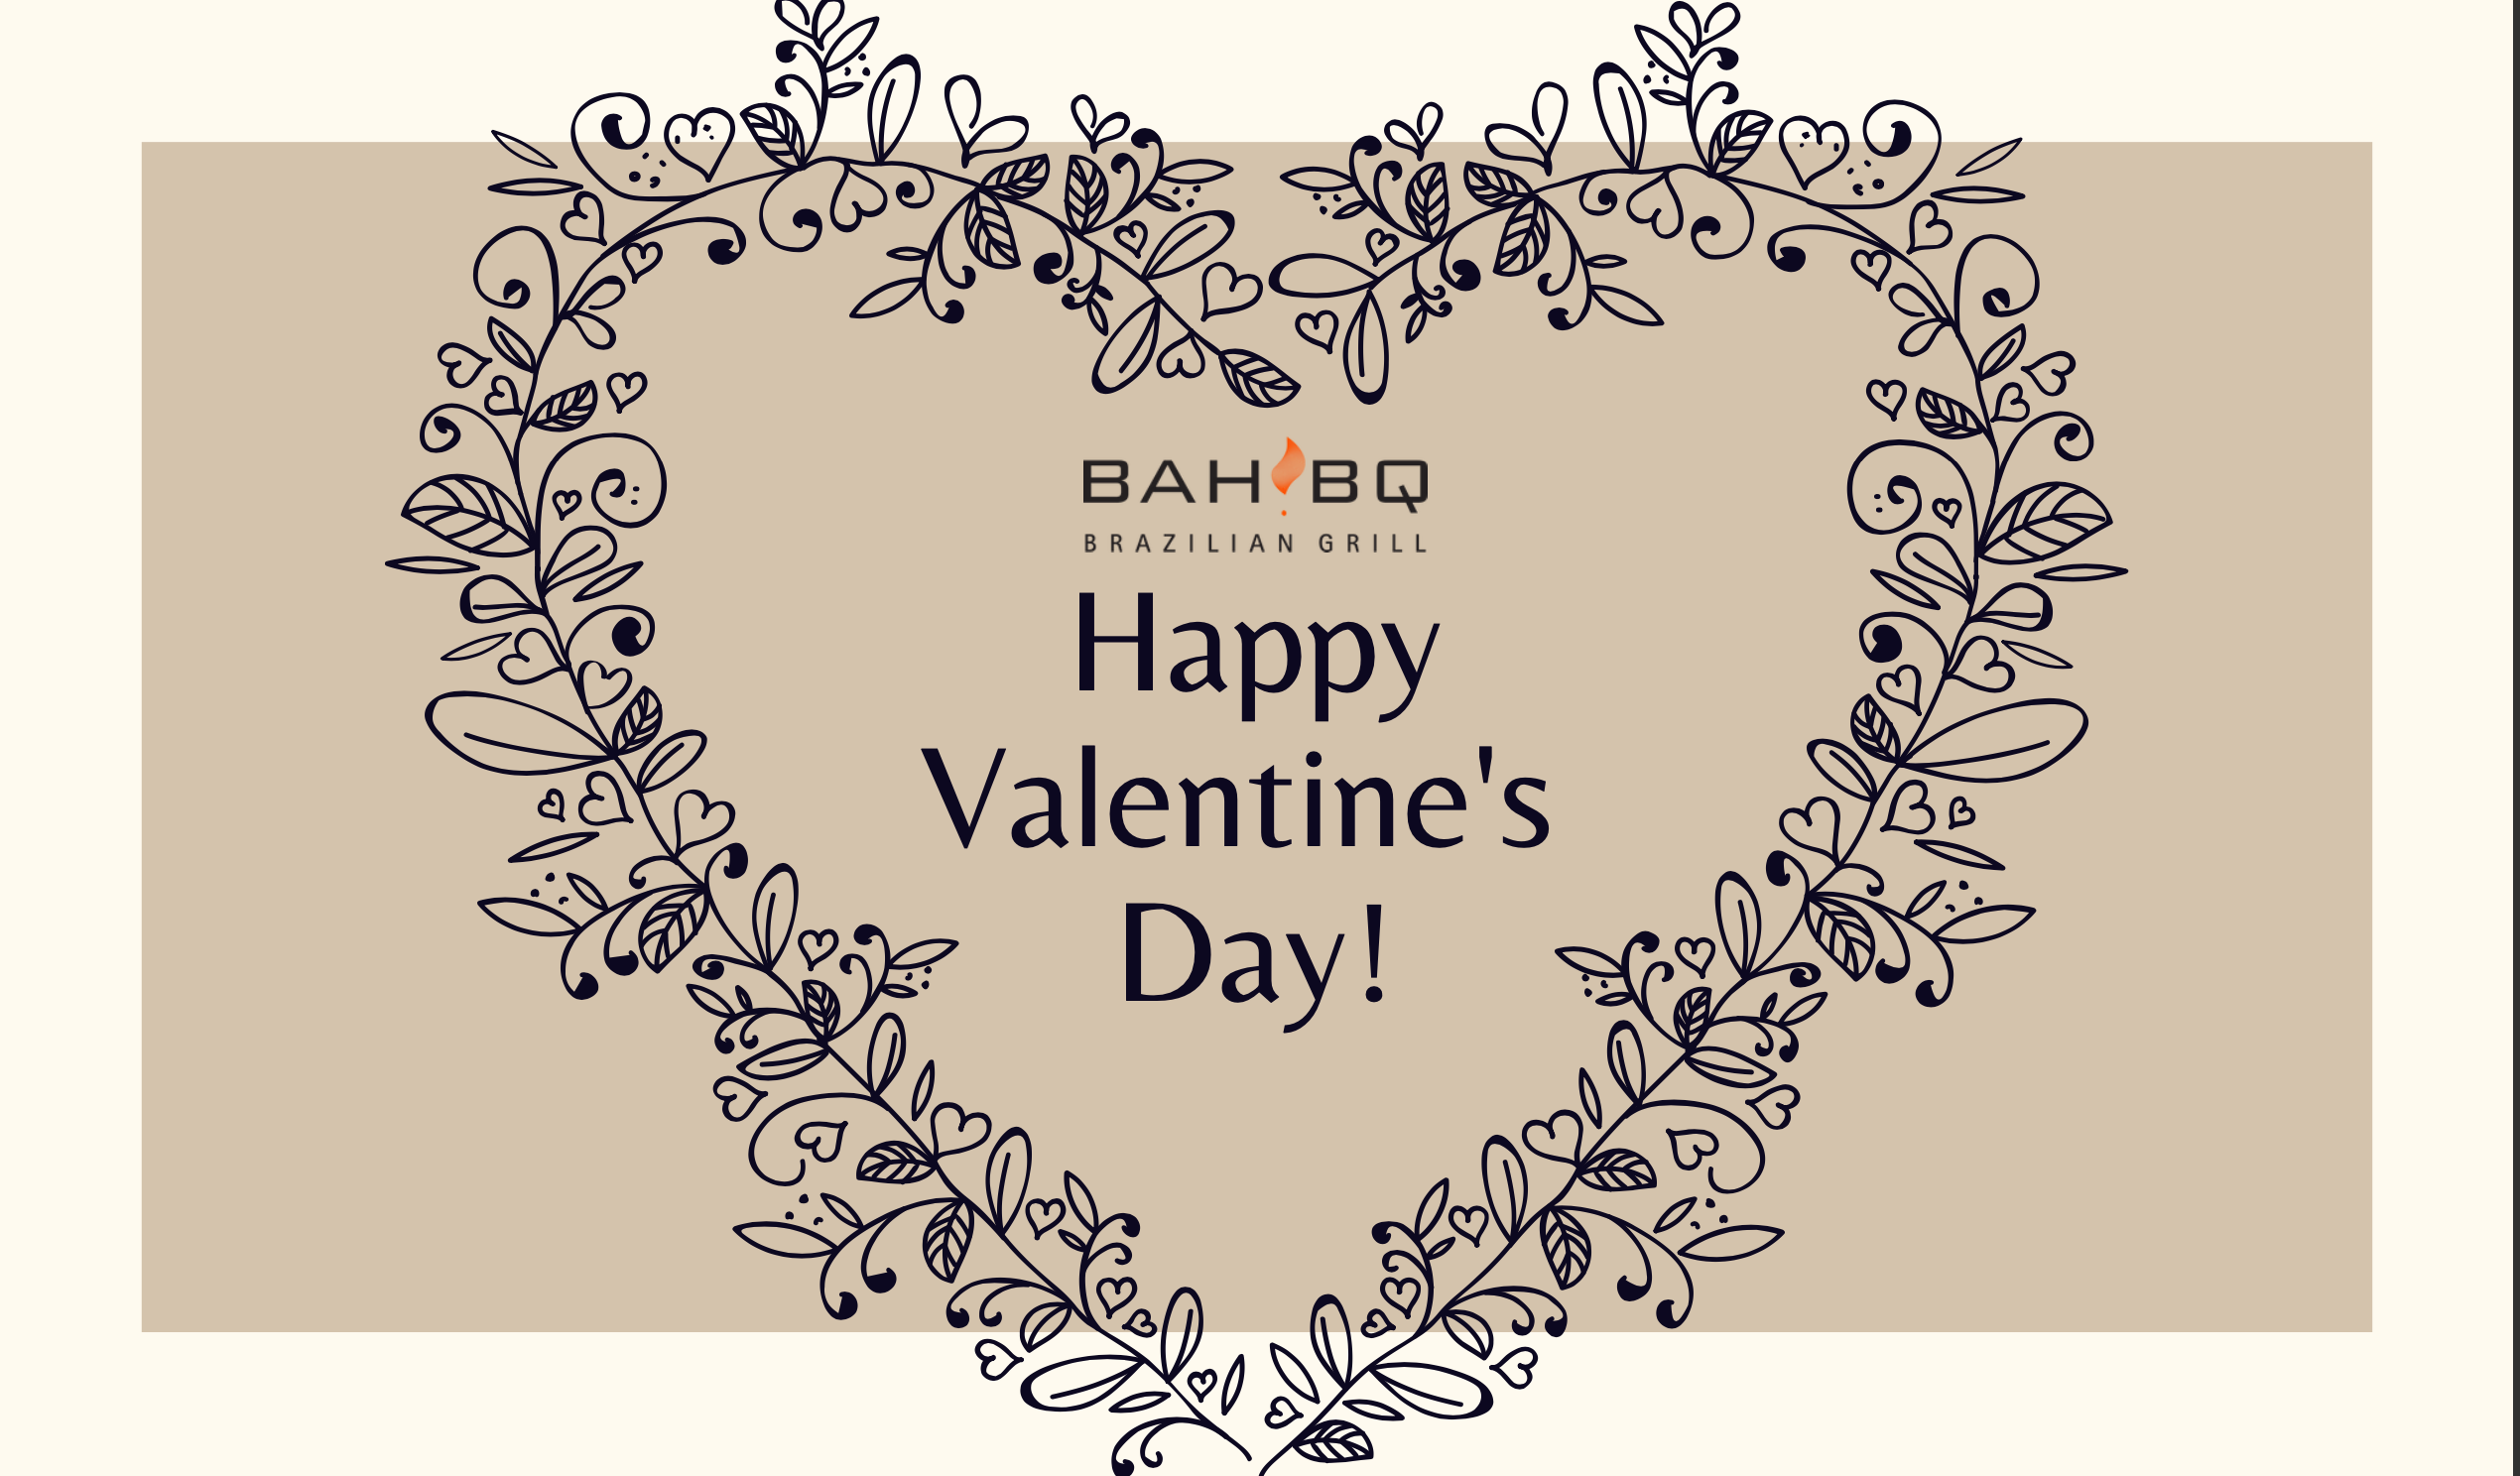 Valentine’s Day at BahBQ